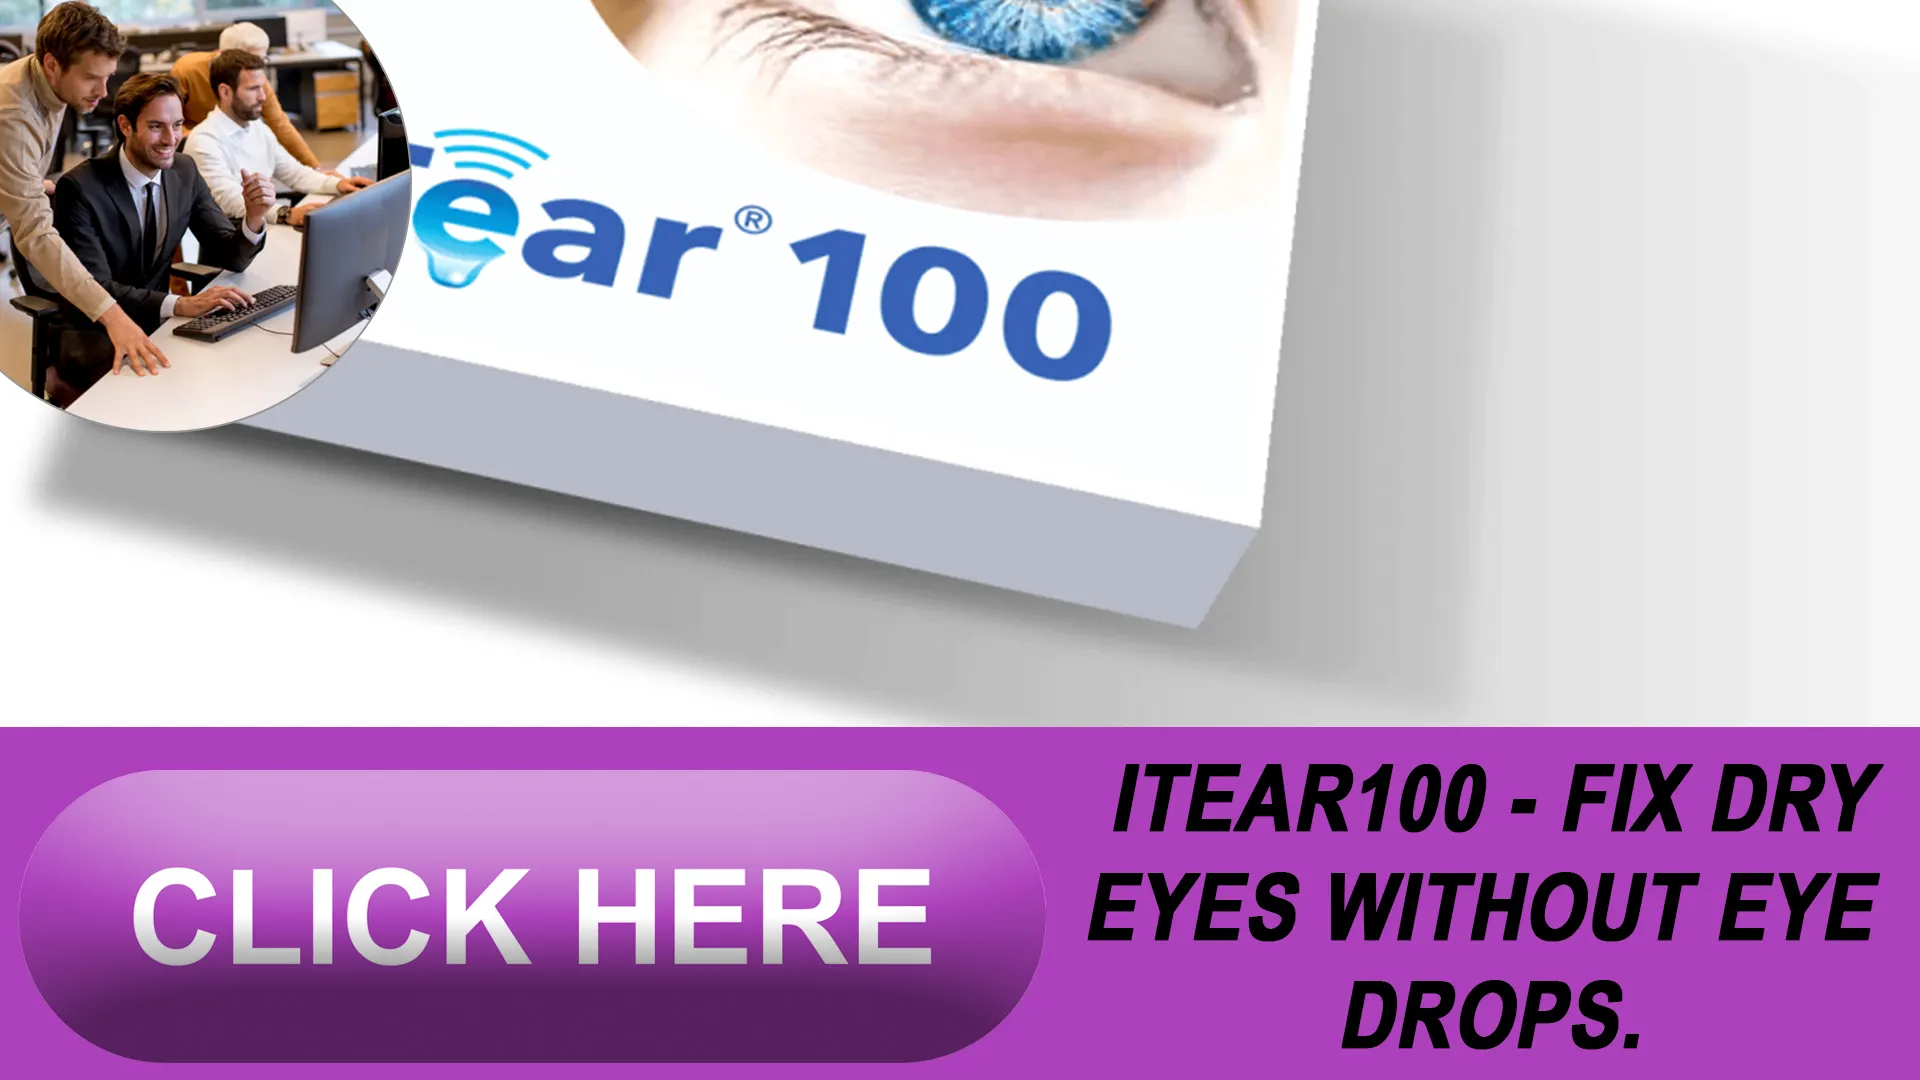 The iTEAR100 Experience: From Doctor